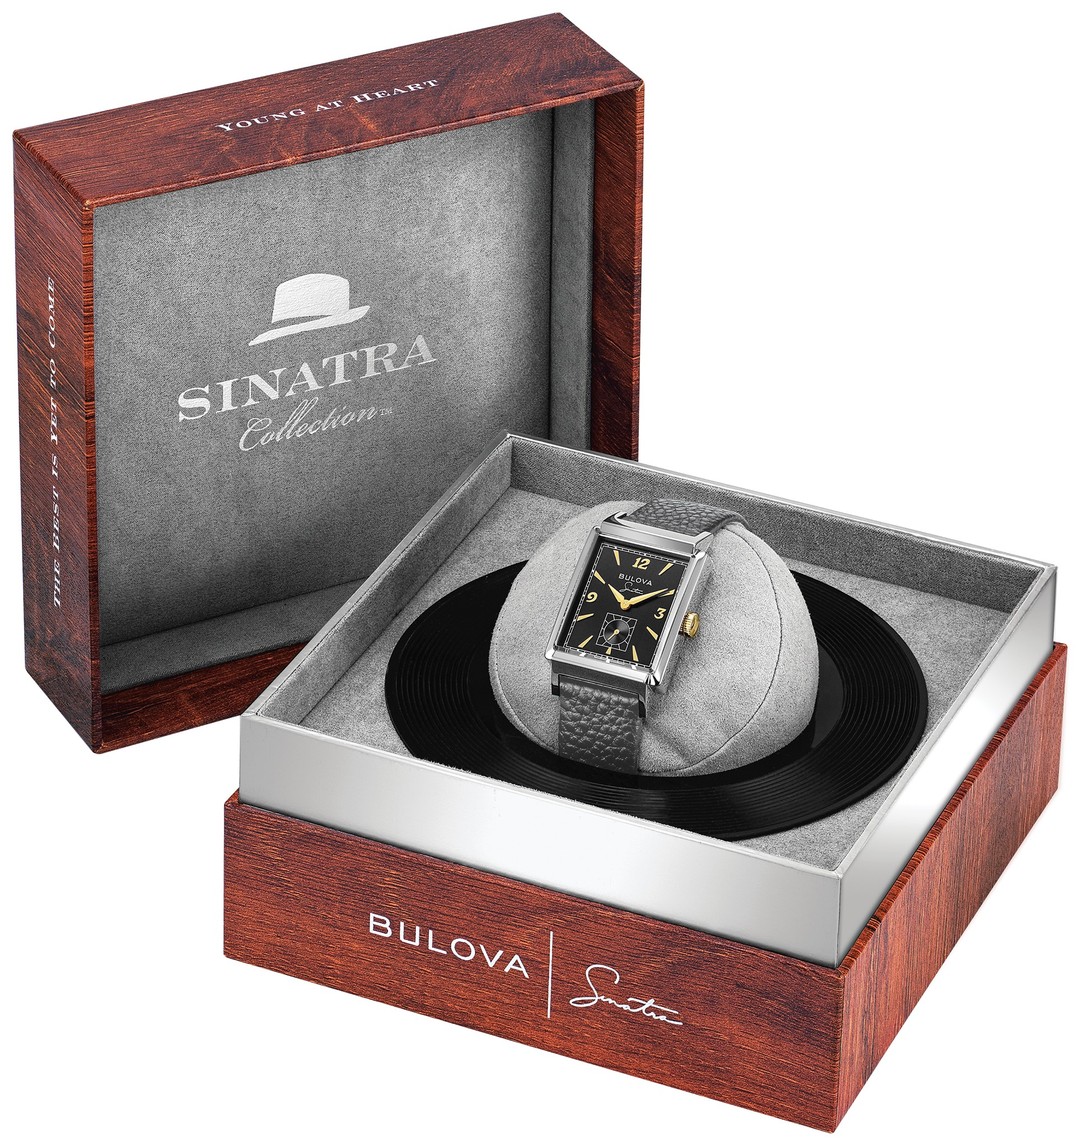 Bulova Frank Sinatra Collection 15% Off US MSRPFrank Sinatra "My Way" WatchStainless Steel & Gold Plated Accents Bulova MSRP: $495Crisson Retail: $420.75(BUL 8261 SINAT)Available At Crisson Hamilton Monday - Saturday10am - 5pmFace Masks Are A MustPhysical Distancing Is A Must #Bulova #FrankSinatra #vintage #watches #shoplocal #shopatcrisson